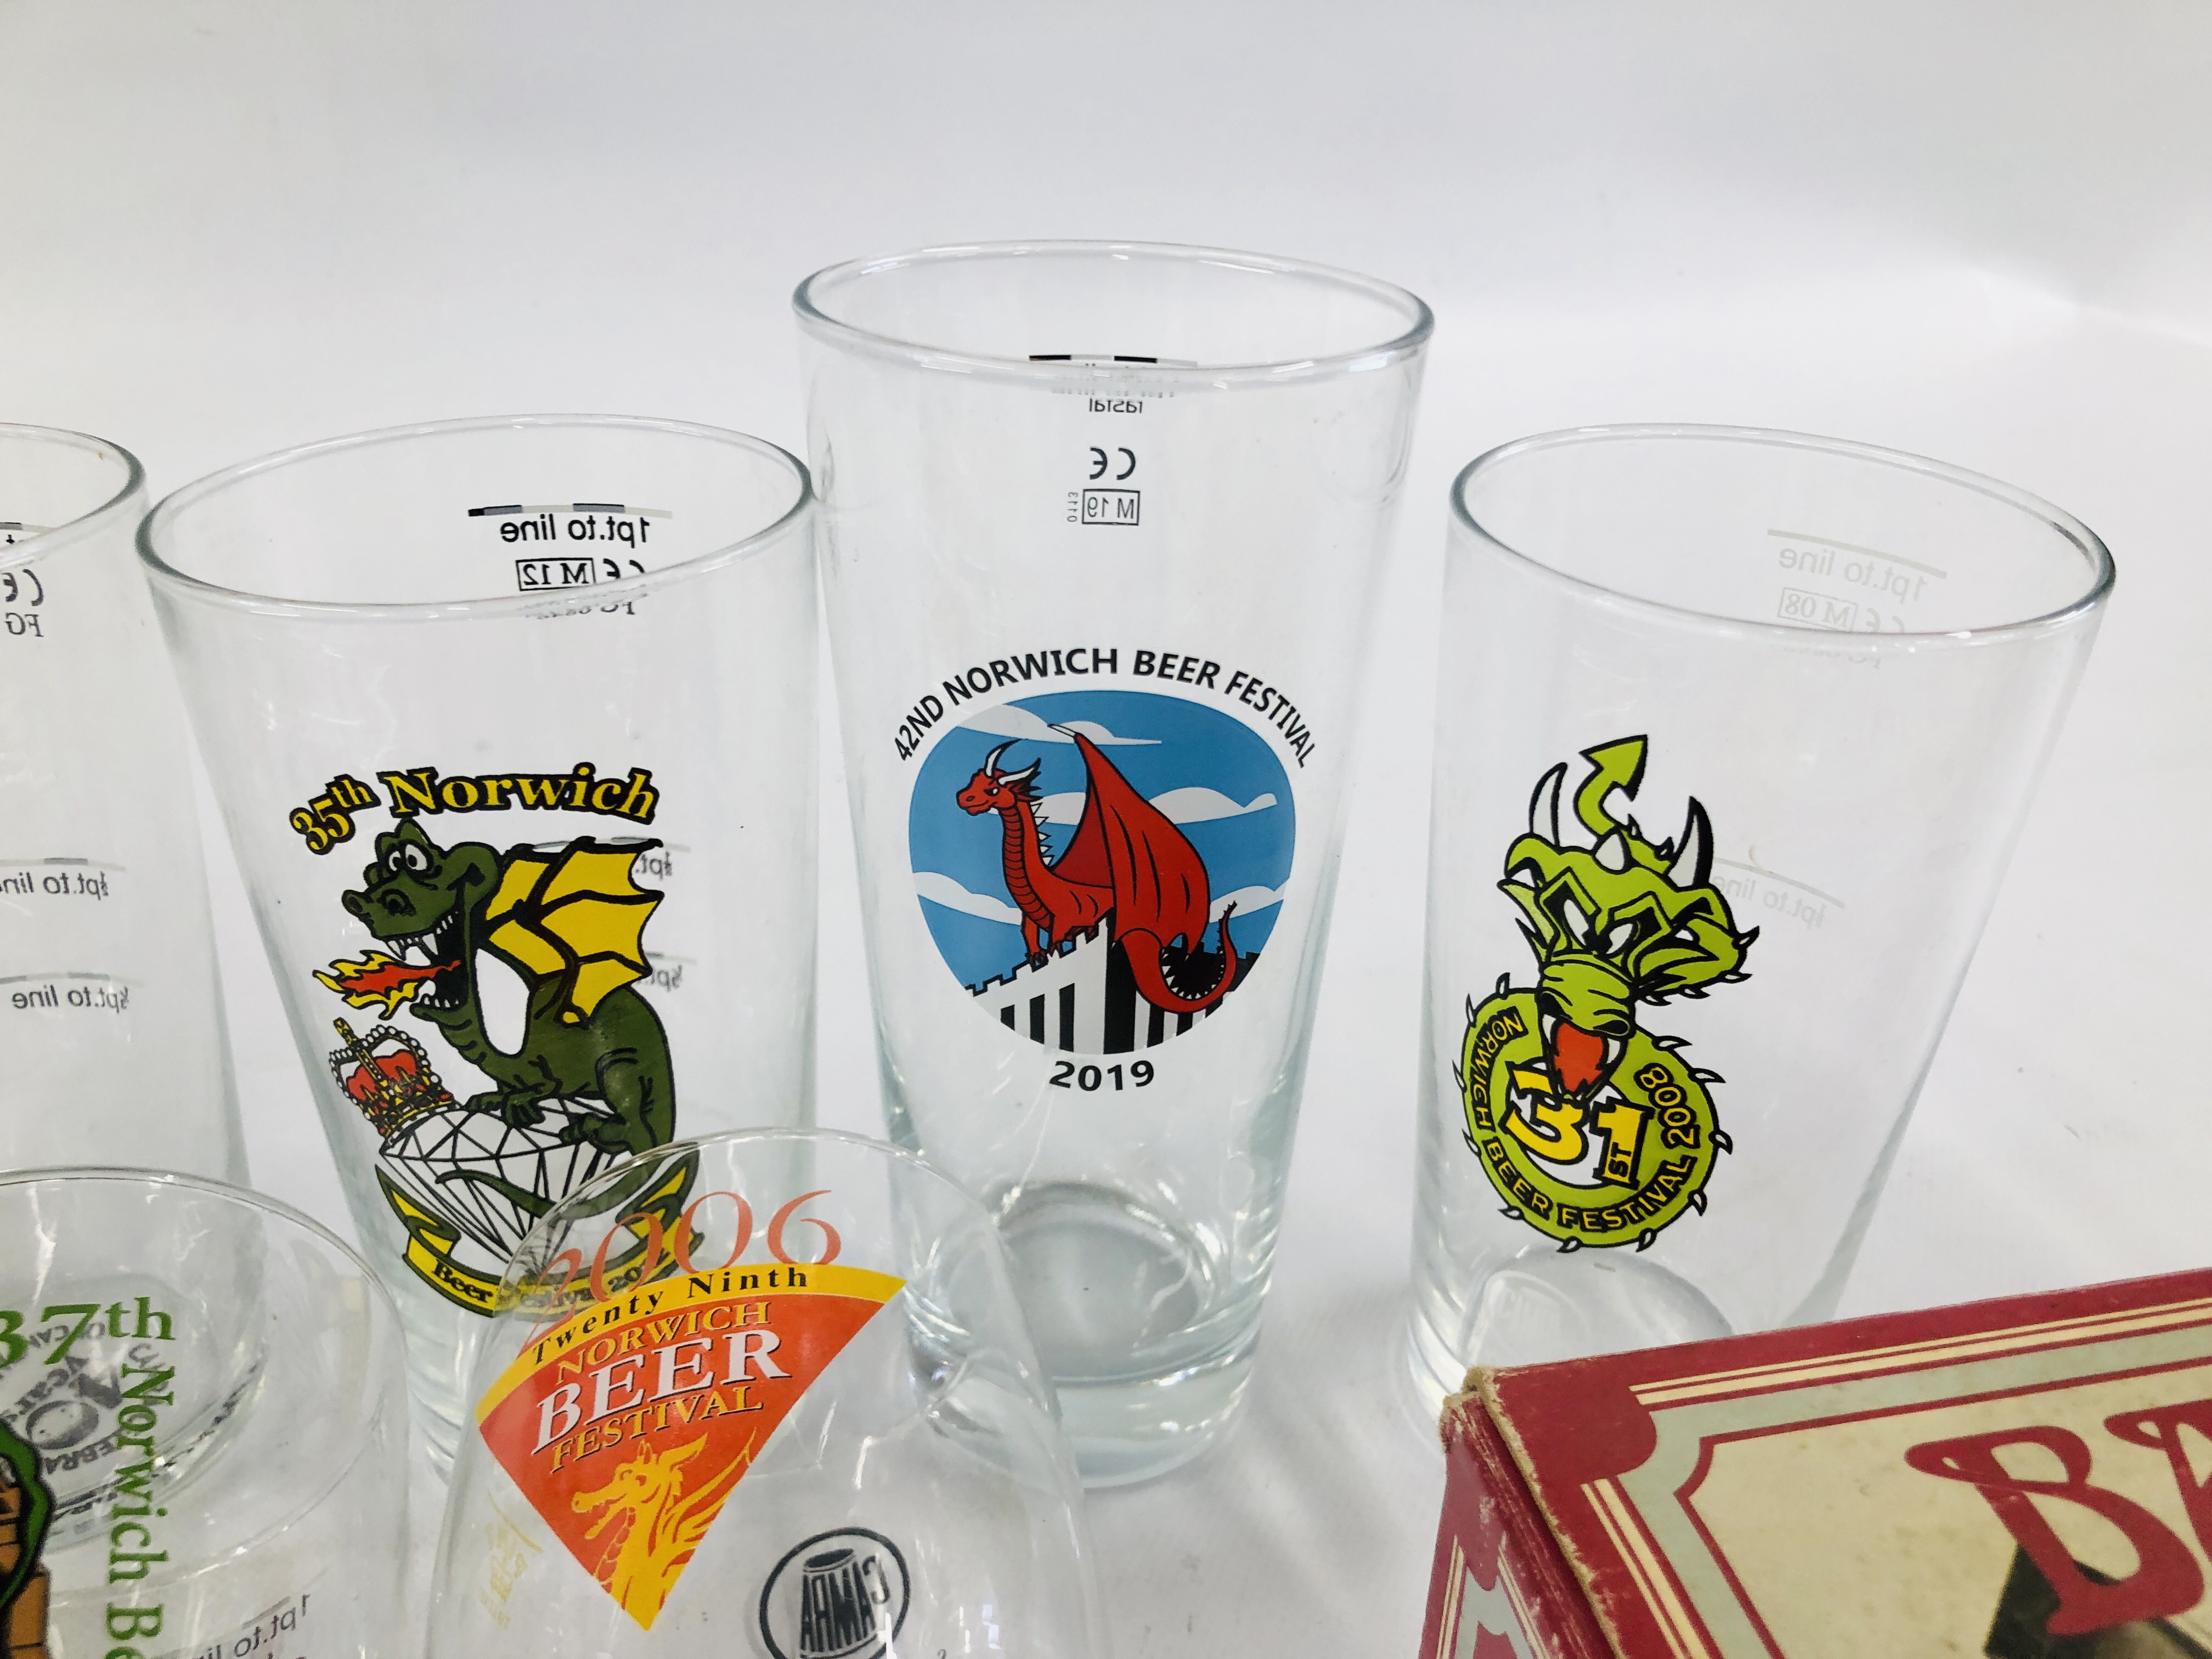 A COLLECTION OF 13 NORWICH BEER FESTIVAL GLASSES ALONG WITH A VINTAGE BOXED SET "BAR BELLES - Image 4 of 7